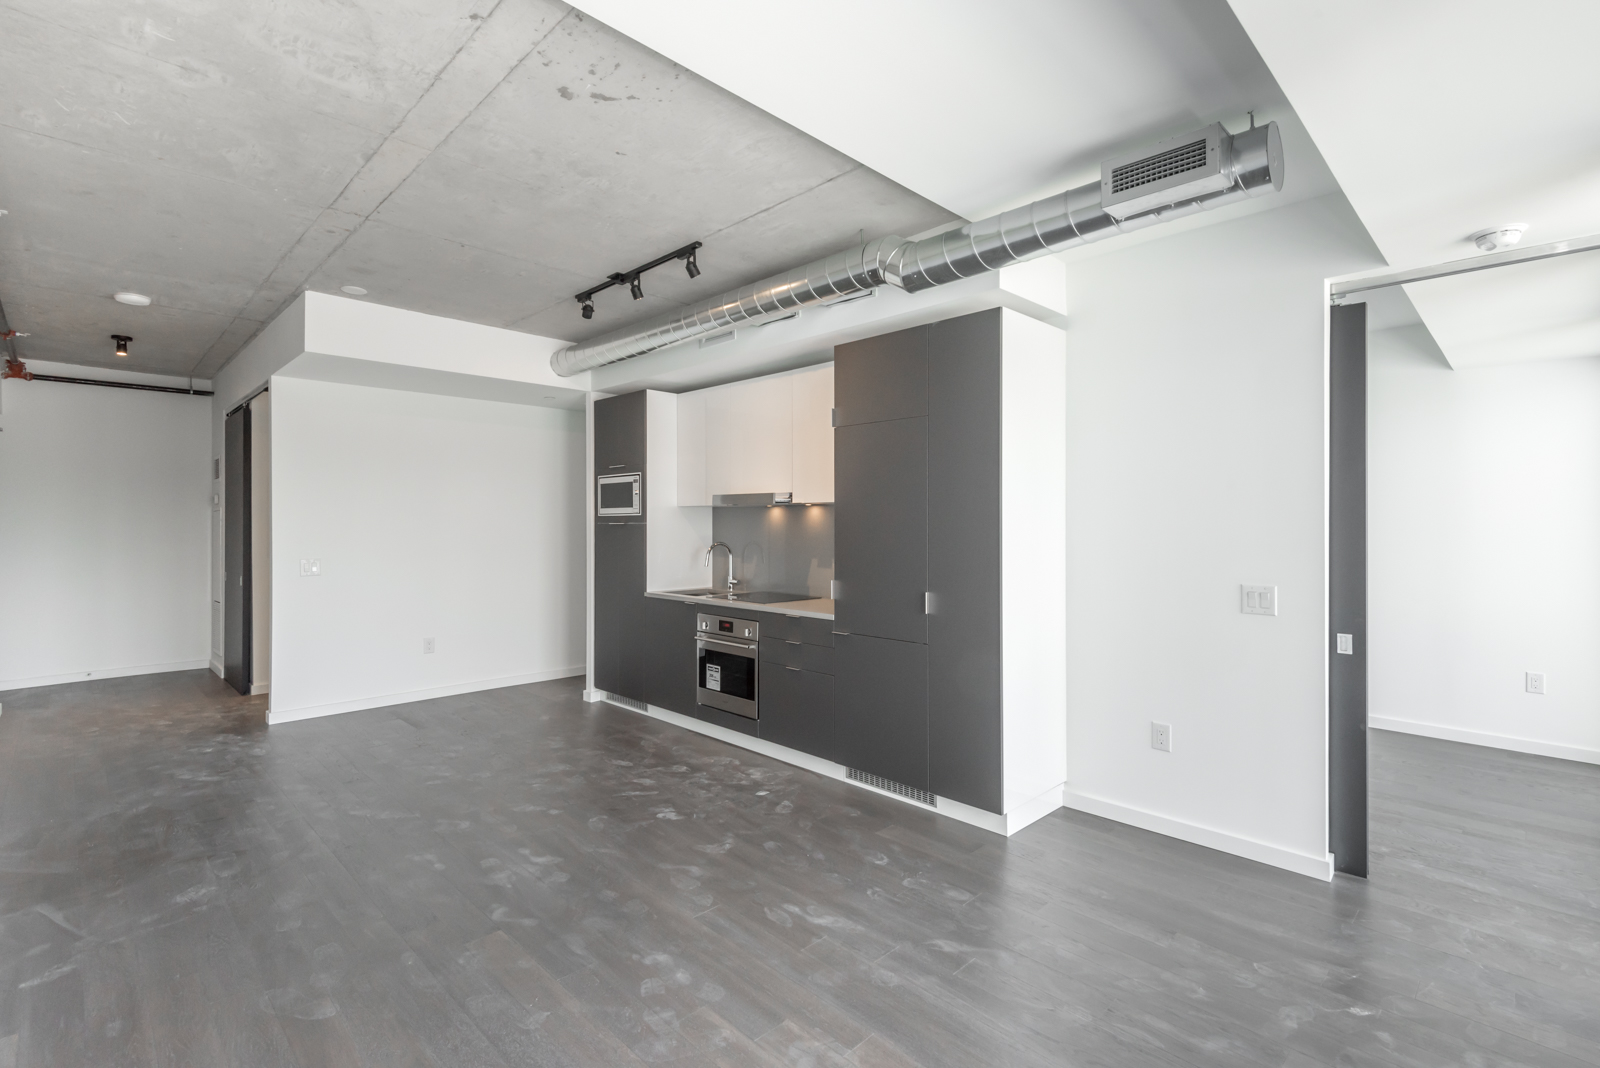 170 Bayview Unit 605 is urban yet luxurious.